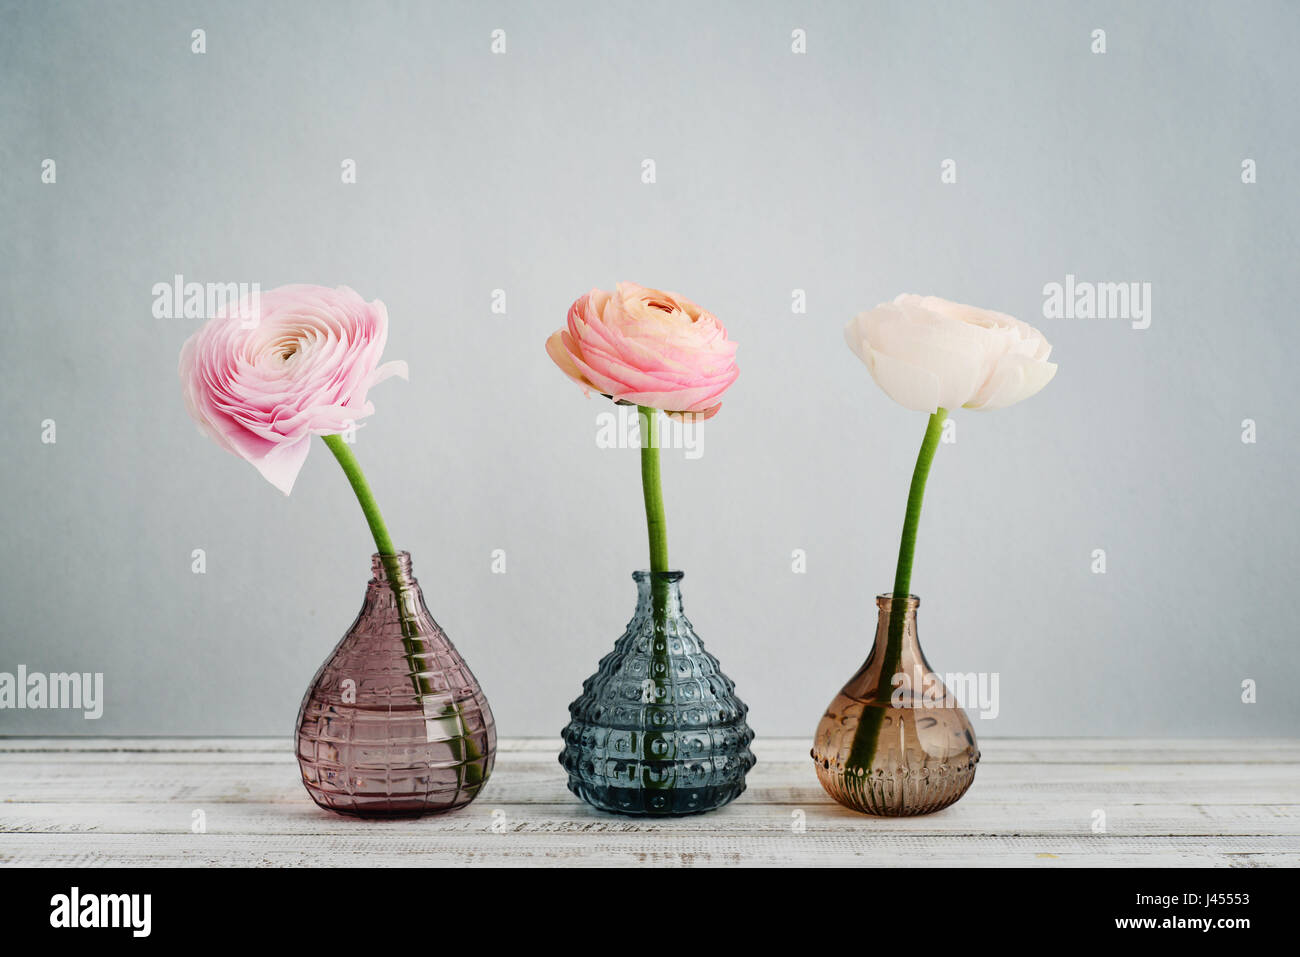 Persian buttercup flowers (ranunculus)  in vases on blue background Stock Photo